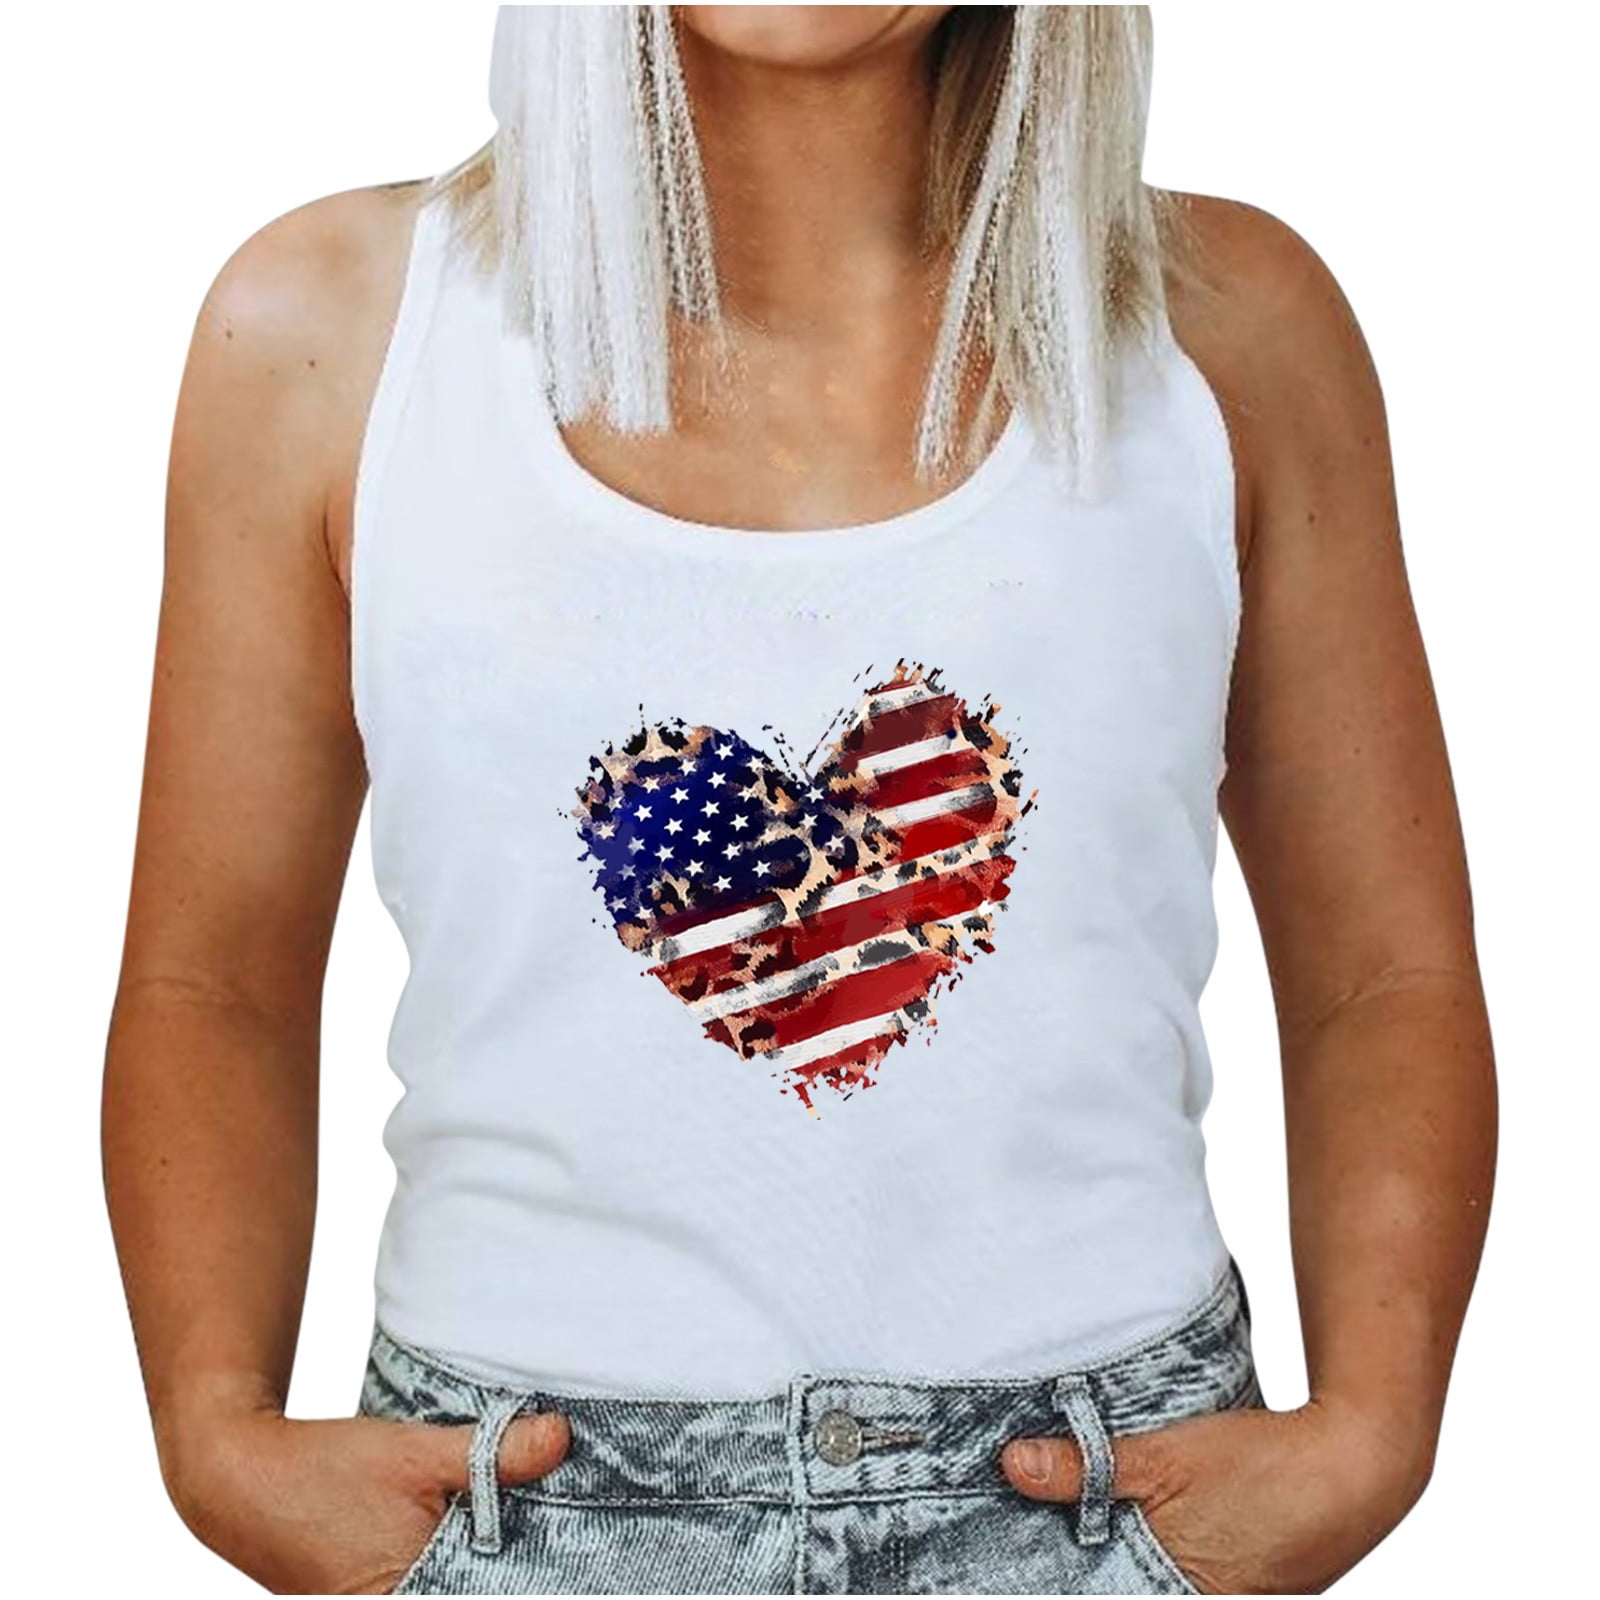 Womens Tank Tops Sleeveless Summer Casual Round Neck Blouse Plain Shirts Camisole Tops MILIMIEYIK Blouse July 4th Womens 